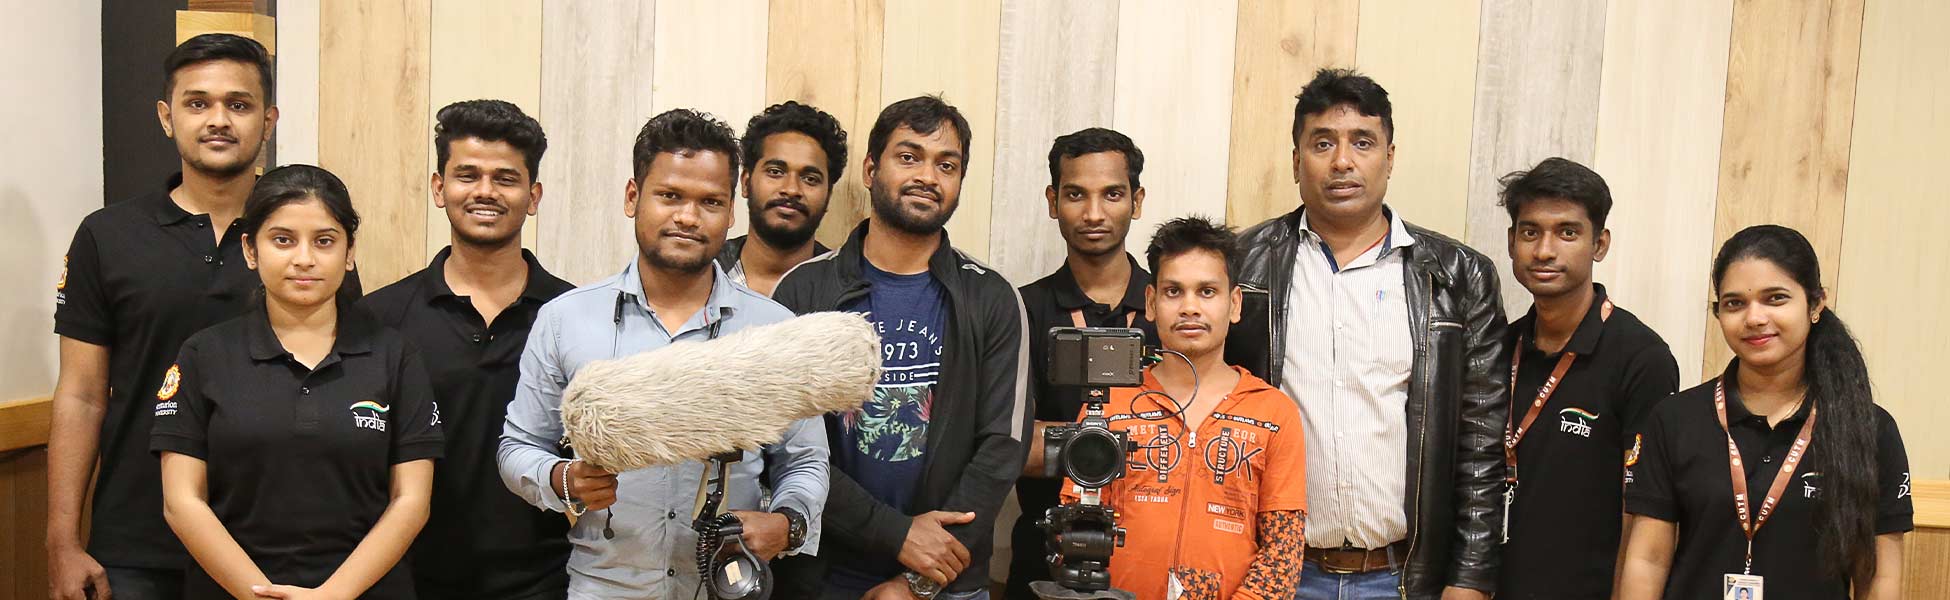 film production services in Peren, video production services in Peren, tv production services in Peren, production services in Peren